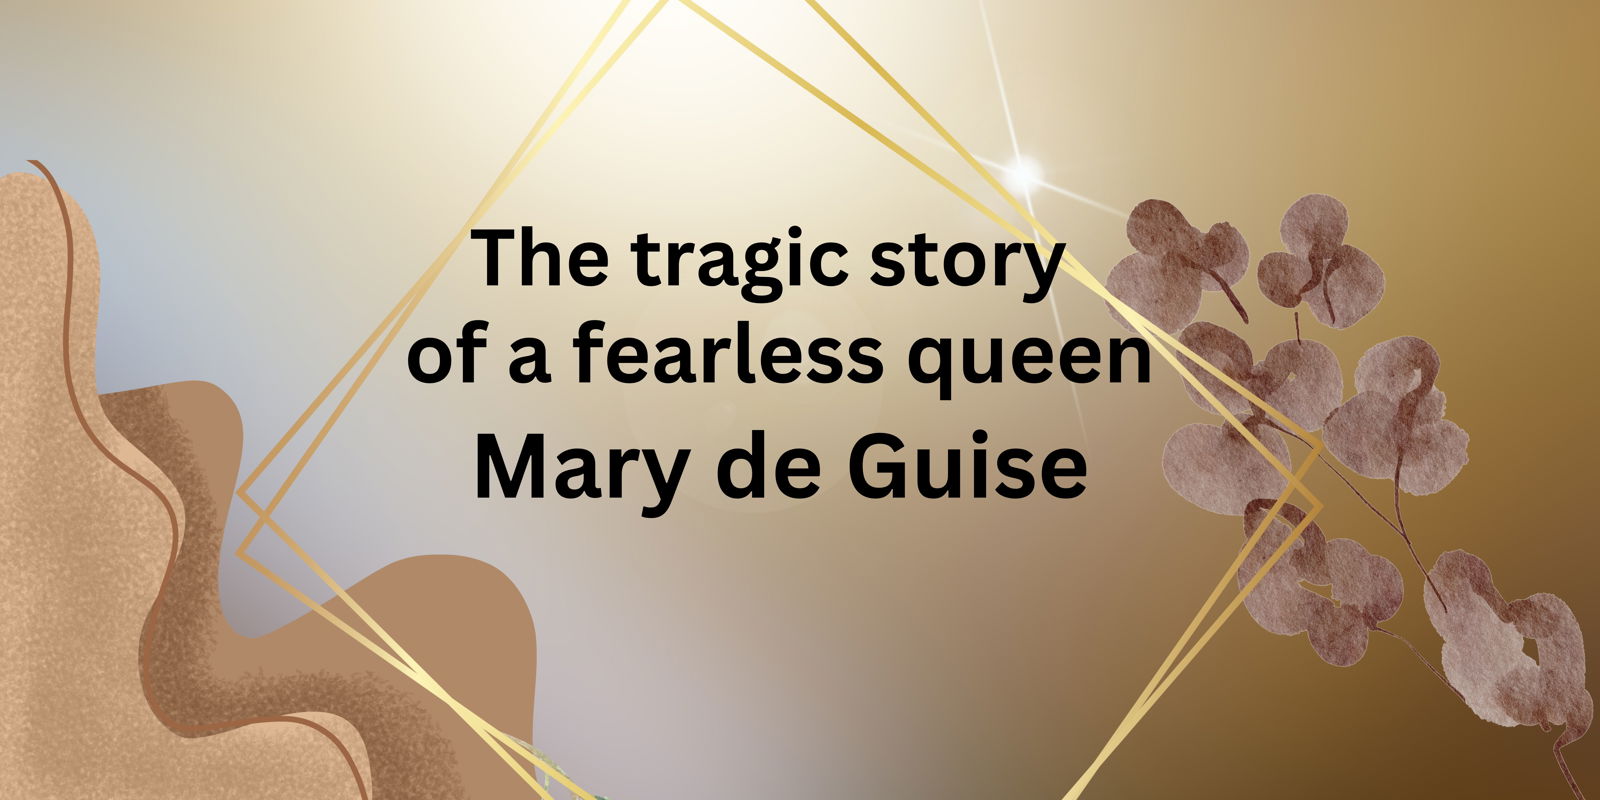 The tragic story of a fearless queen Mary de Guise.